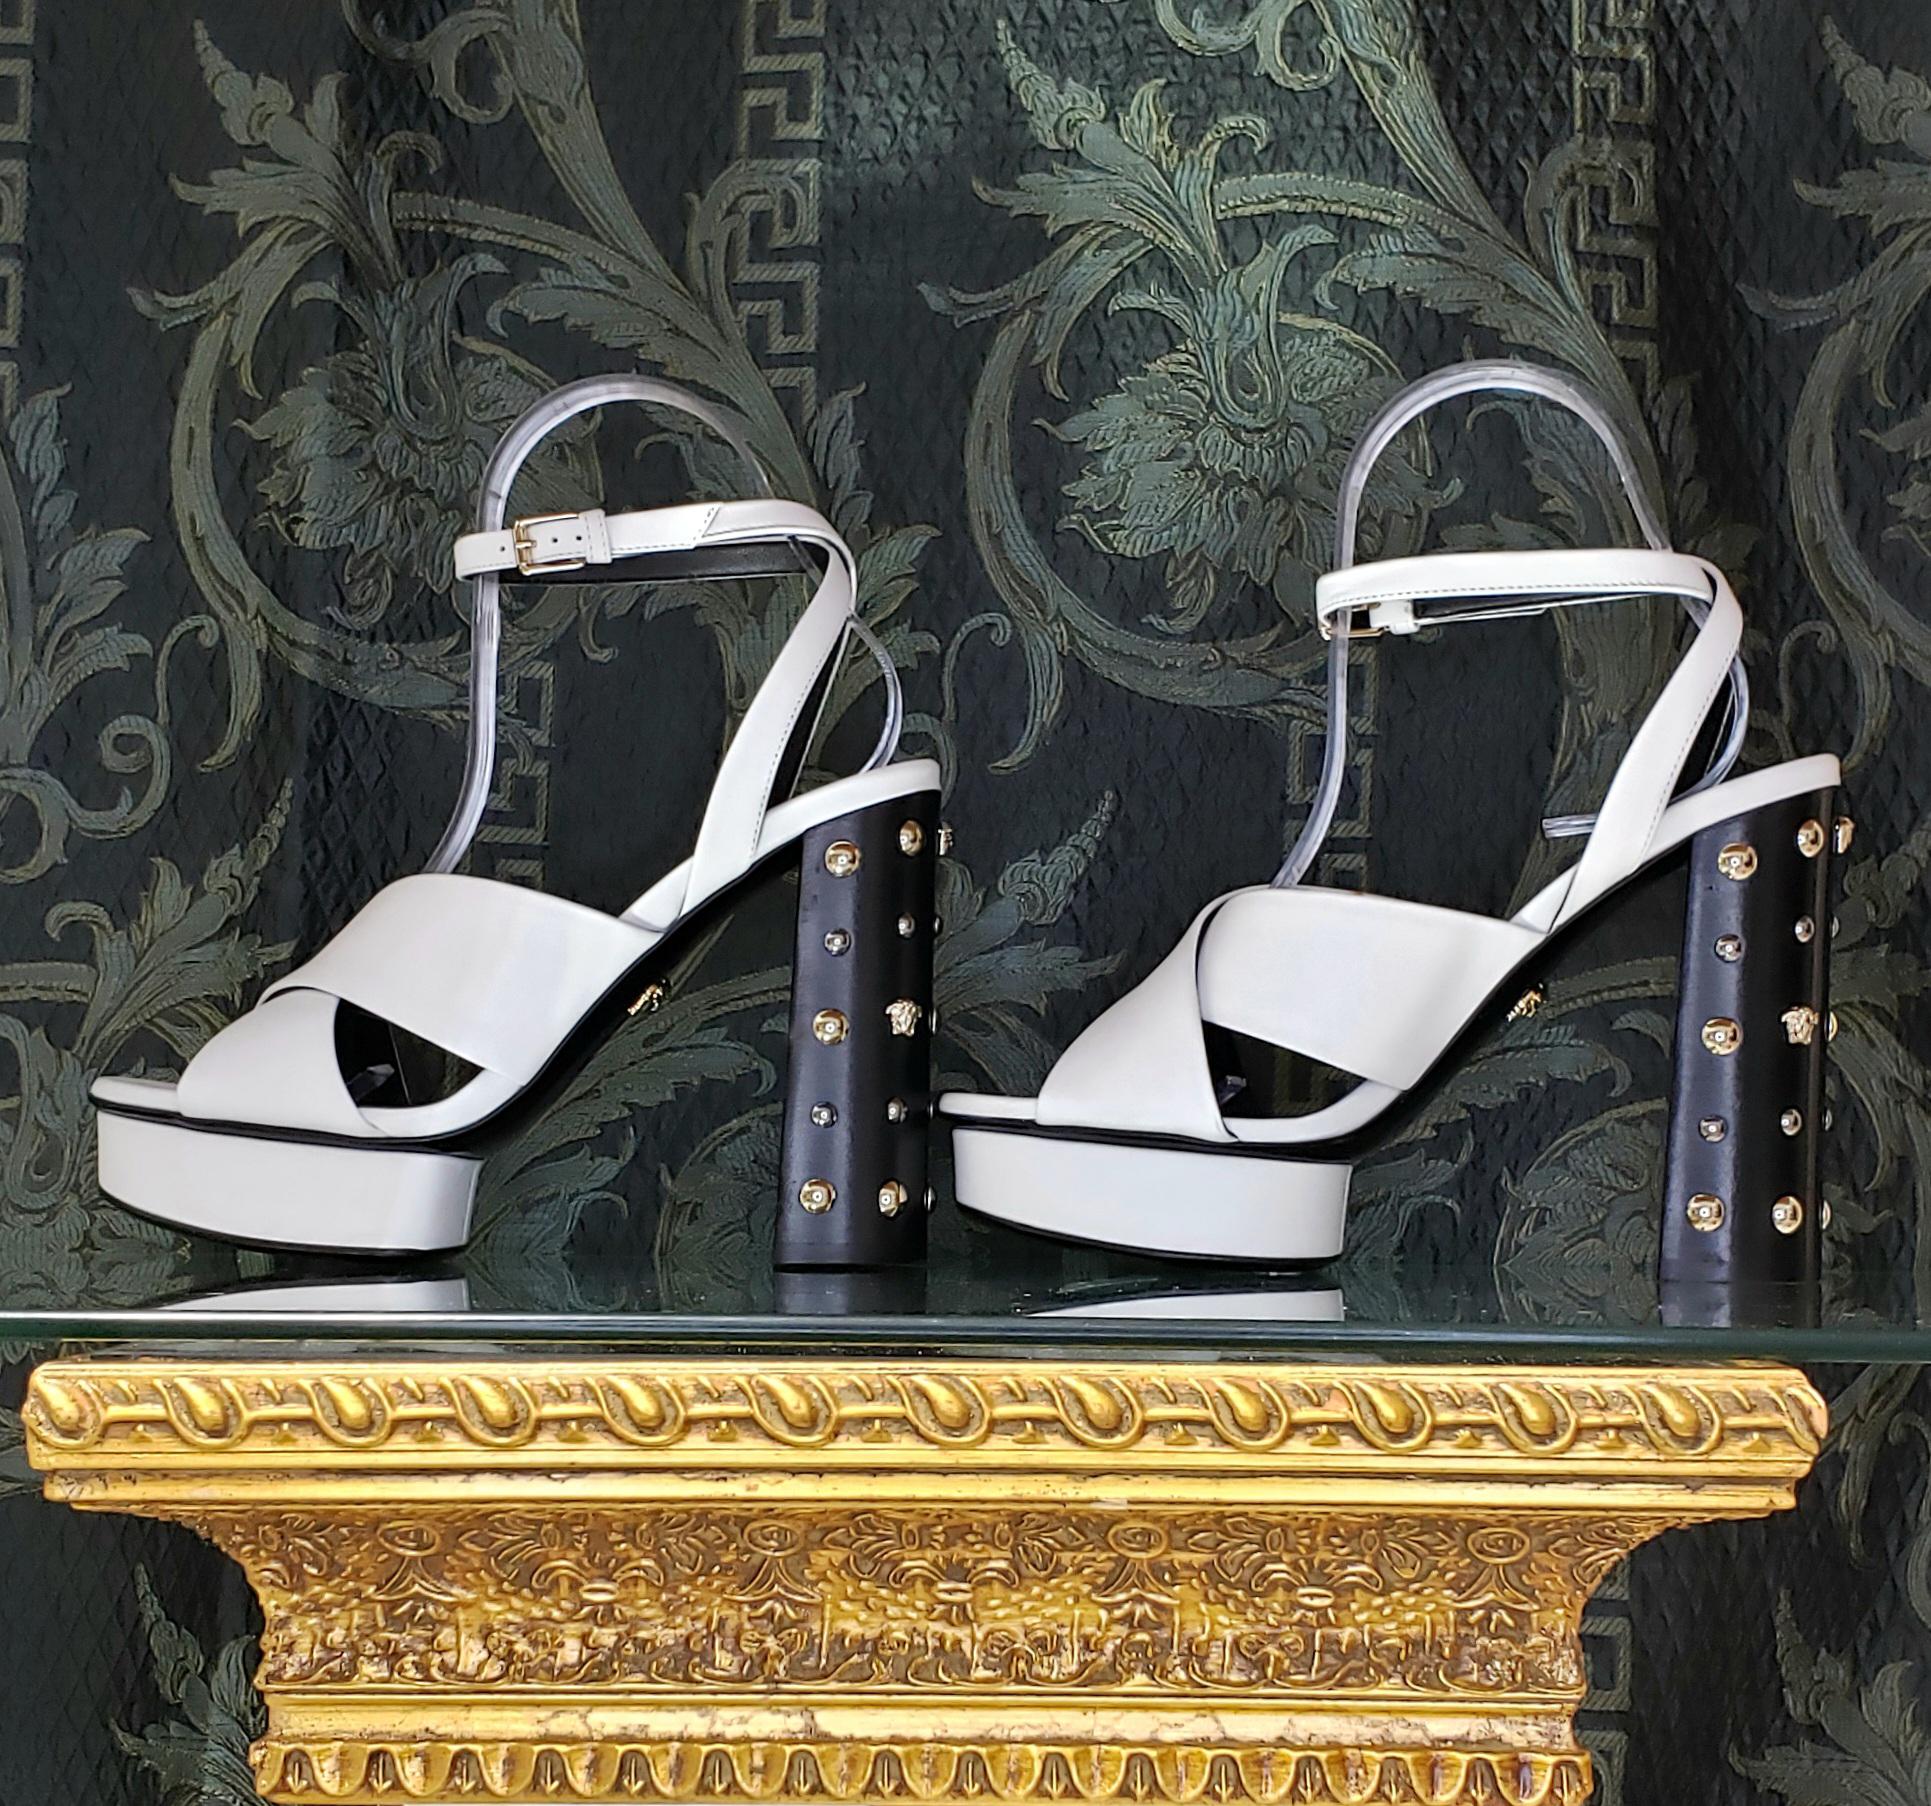 VERSACE

White leather sandals shoes with gold and silver studs and famous Medusa Studs

DETAILS:

Open toe and heel

Buckling ankle strap closure

Content: 100% Leather (Lining and Sole) 


   Color: White

Heel: 5 1/8 inches

Platform: 1 inch